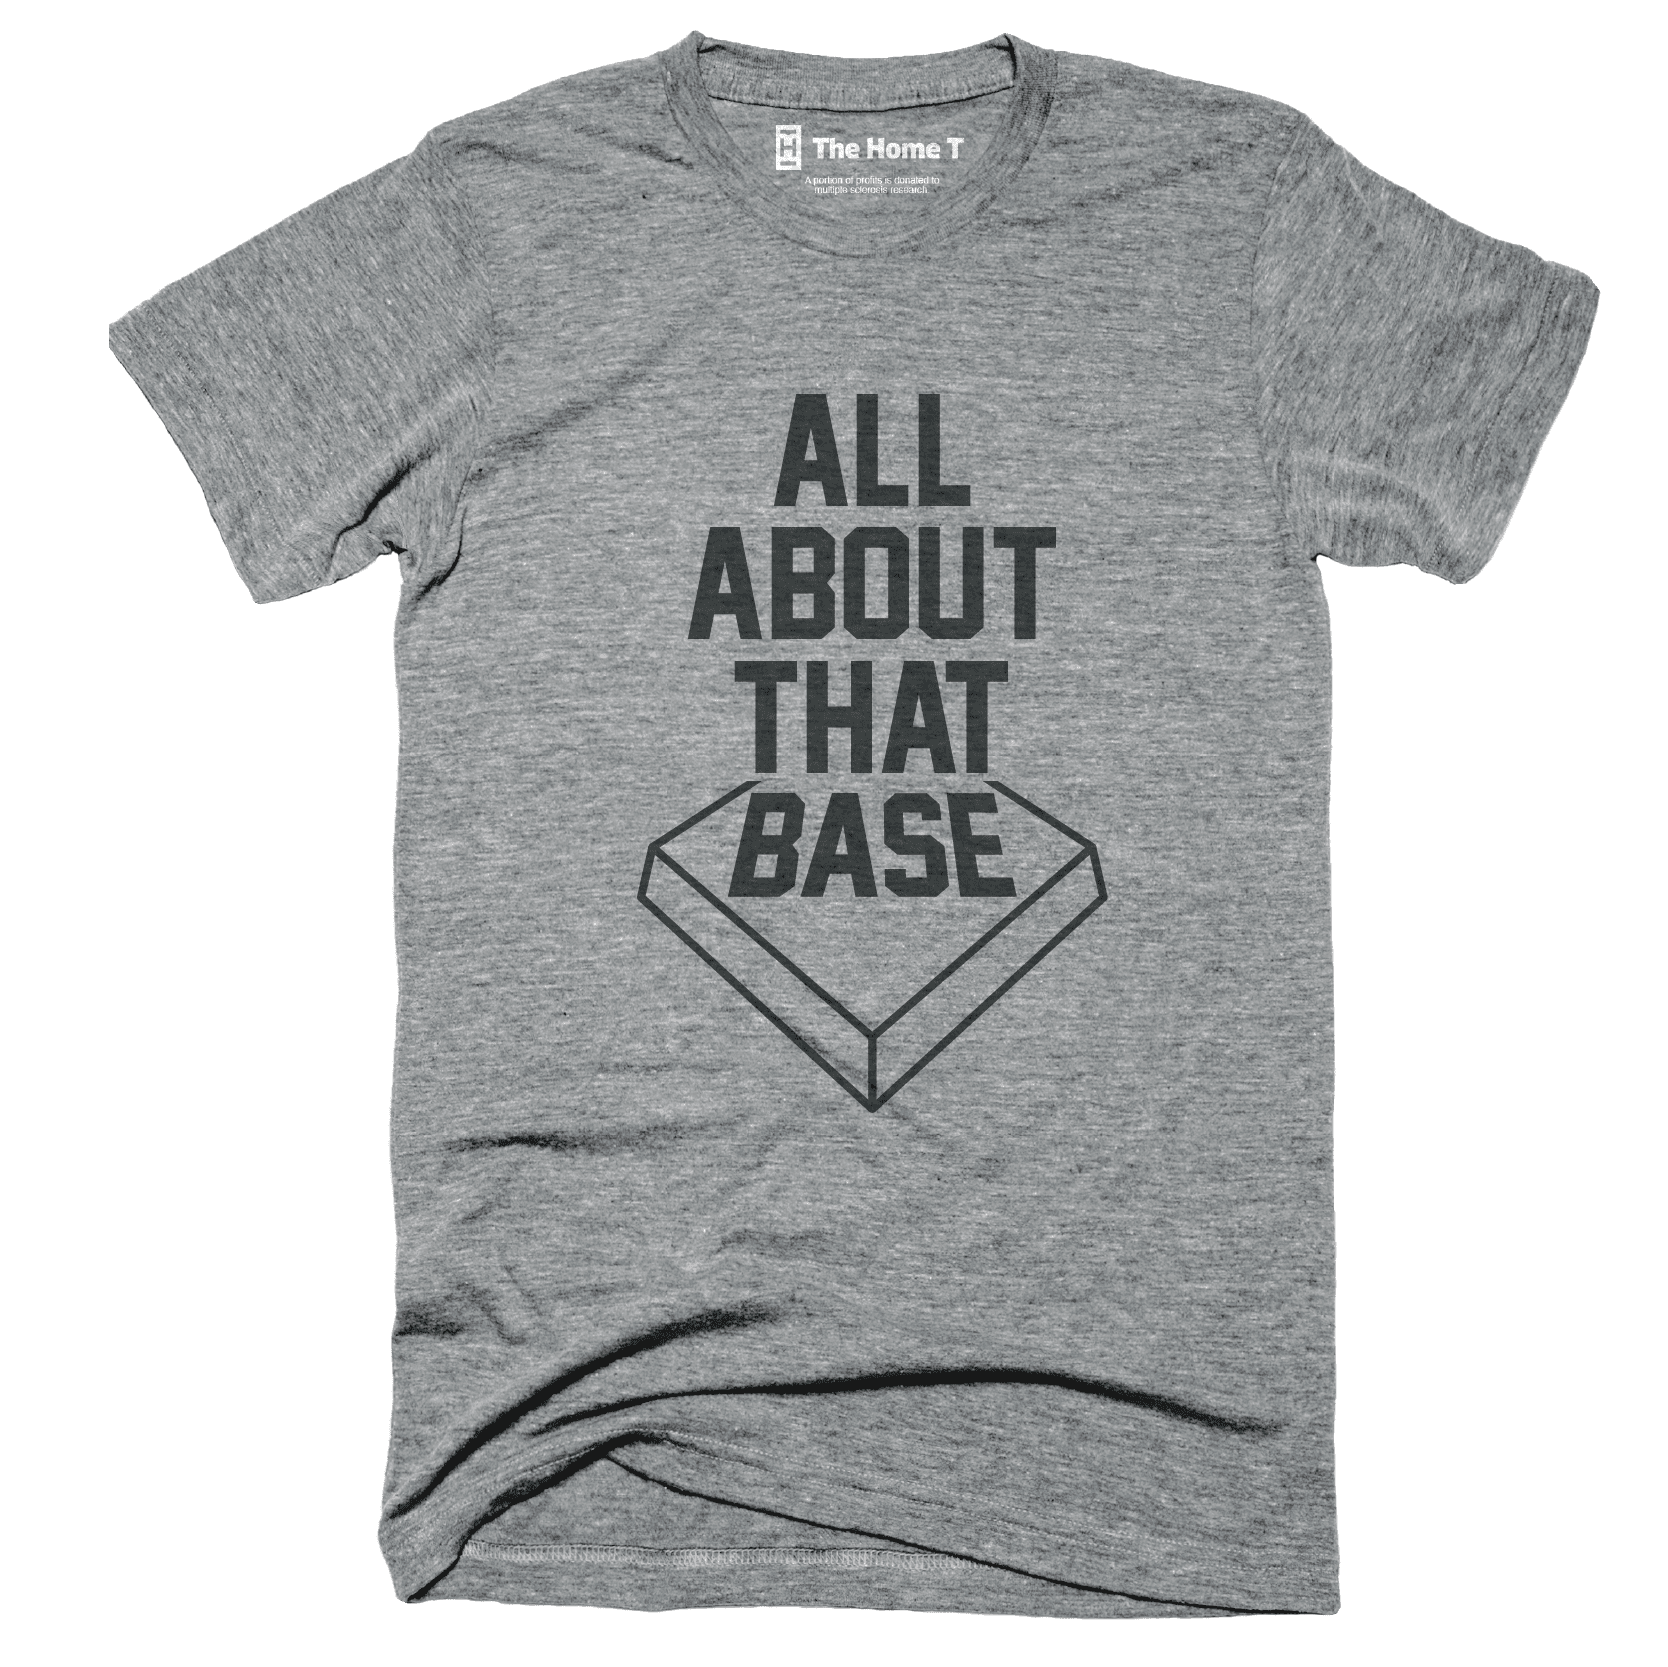 All about that Base-ball